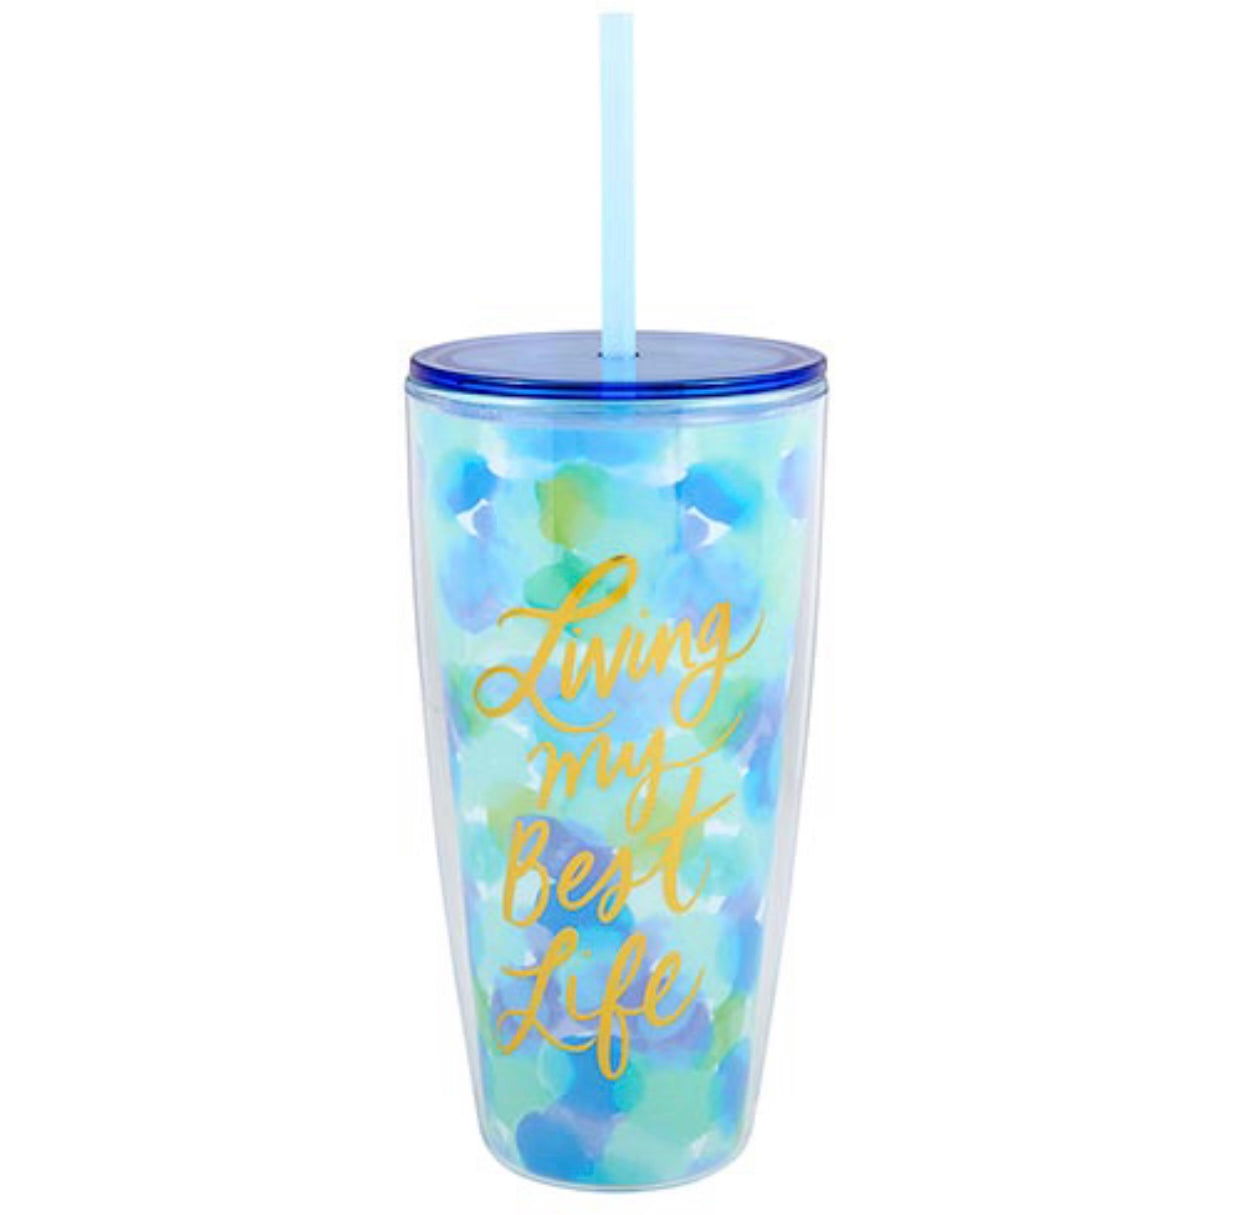 Living My Best Life Double-Wall Grayson Tumbler -